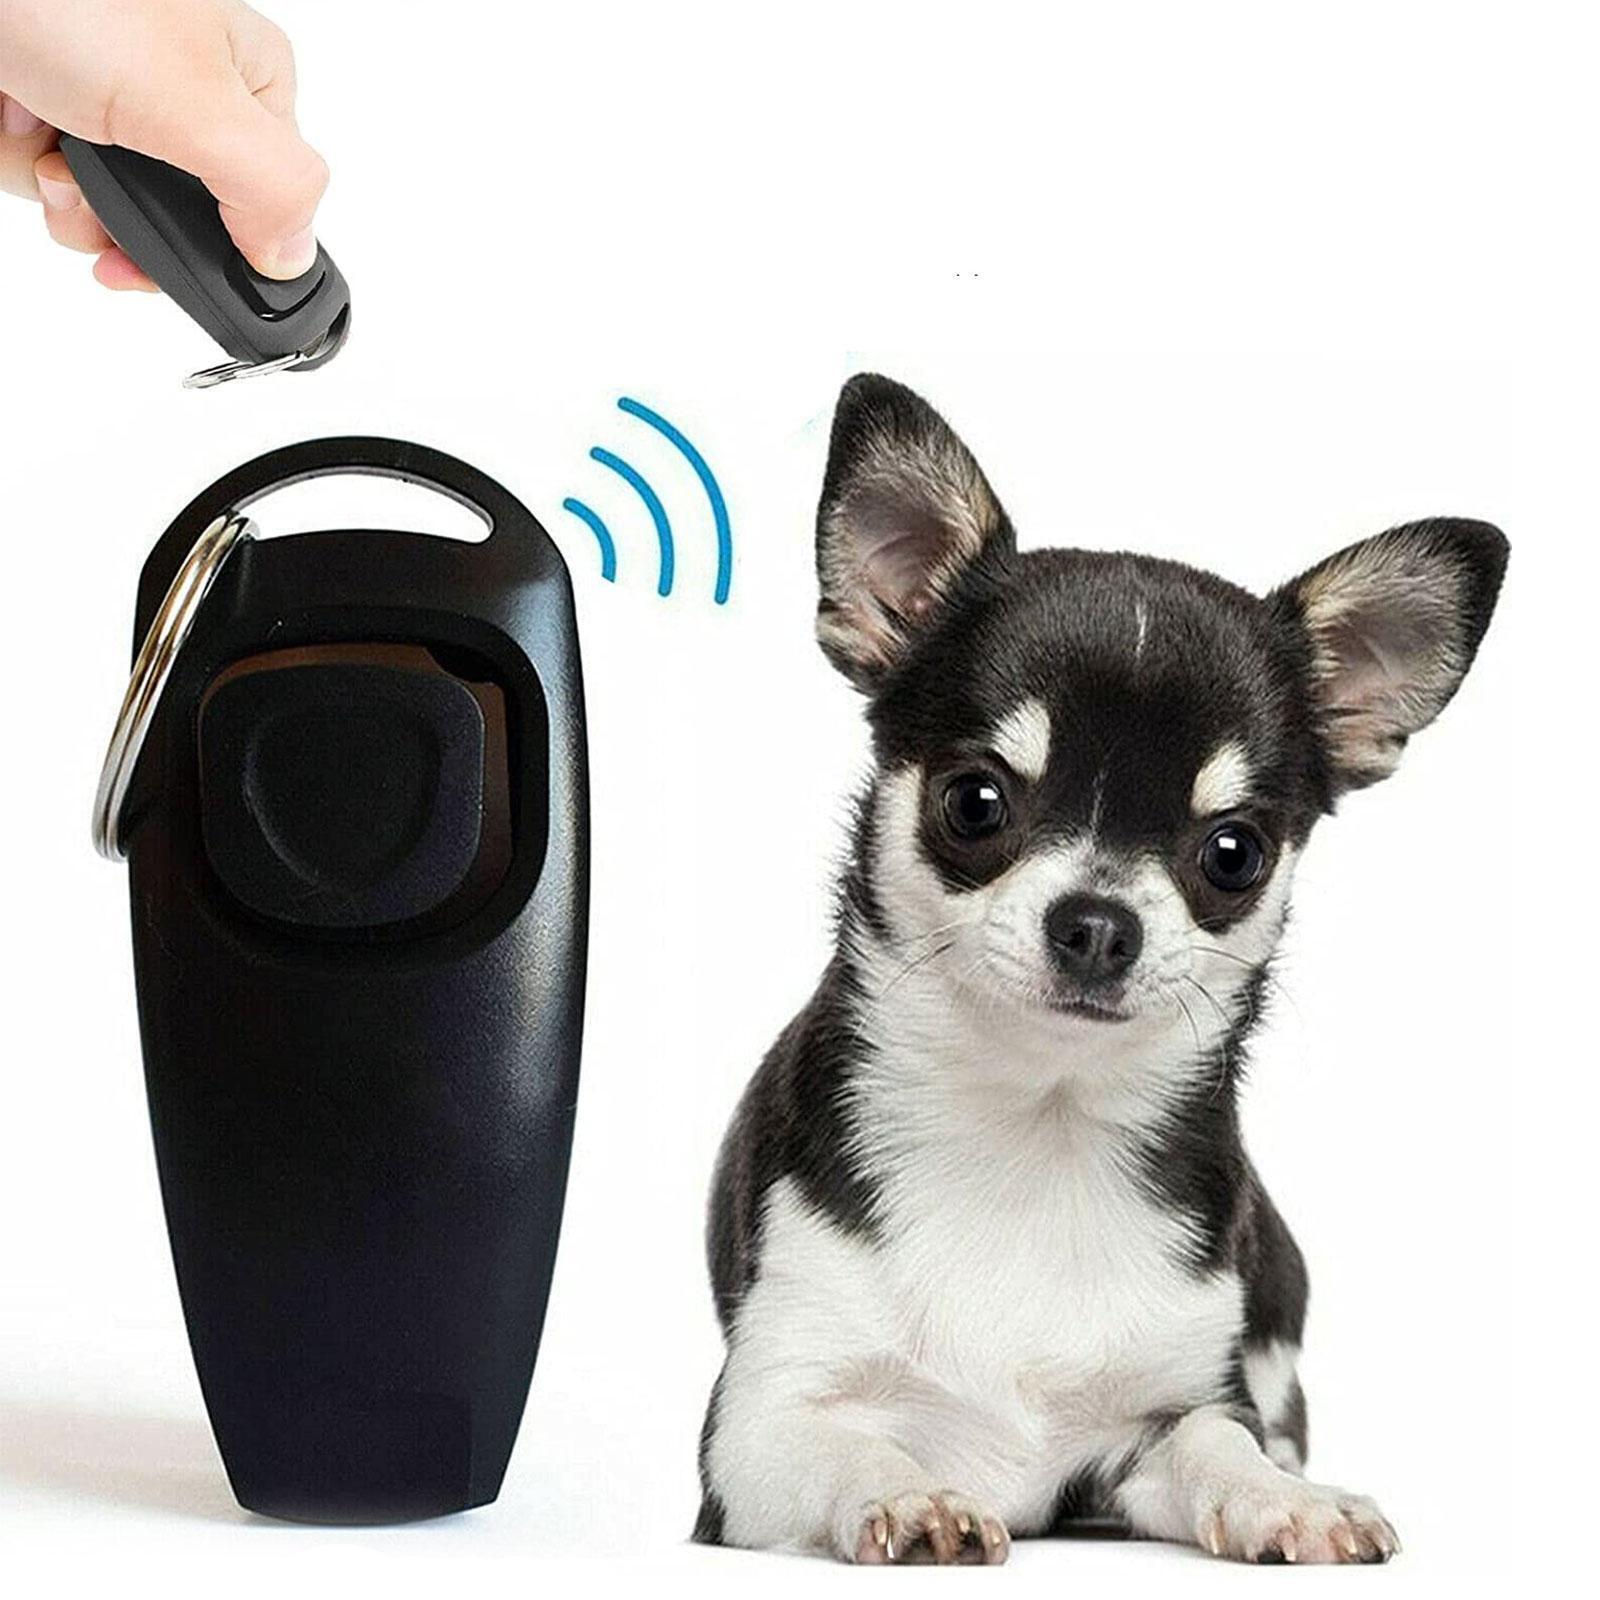 1x Pet Dog Training Whistle Clicker Pet Trainer Click Aid Puppy Guide Y8m2